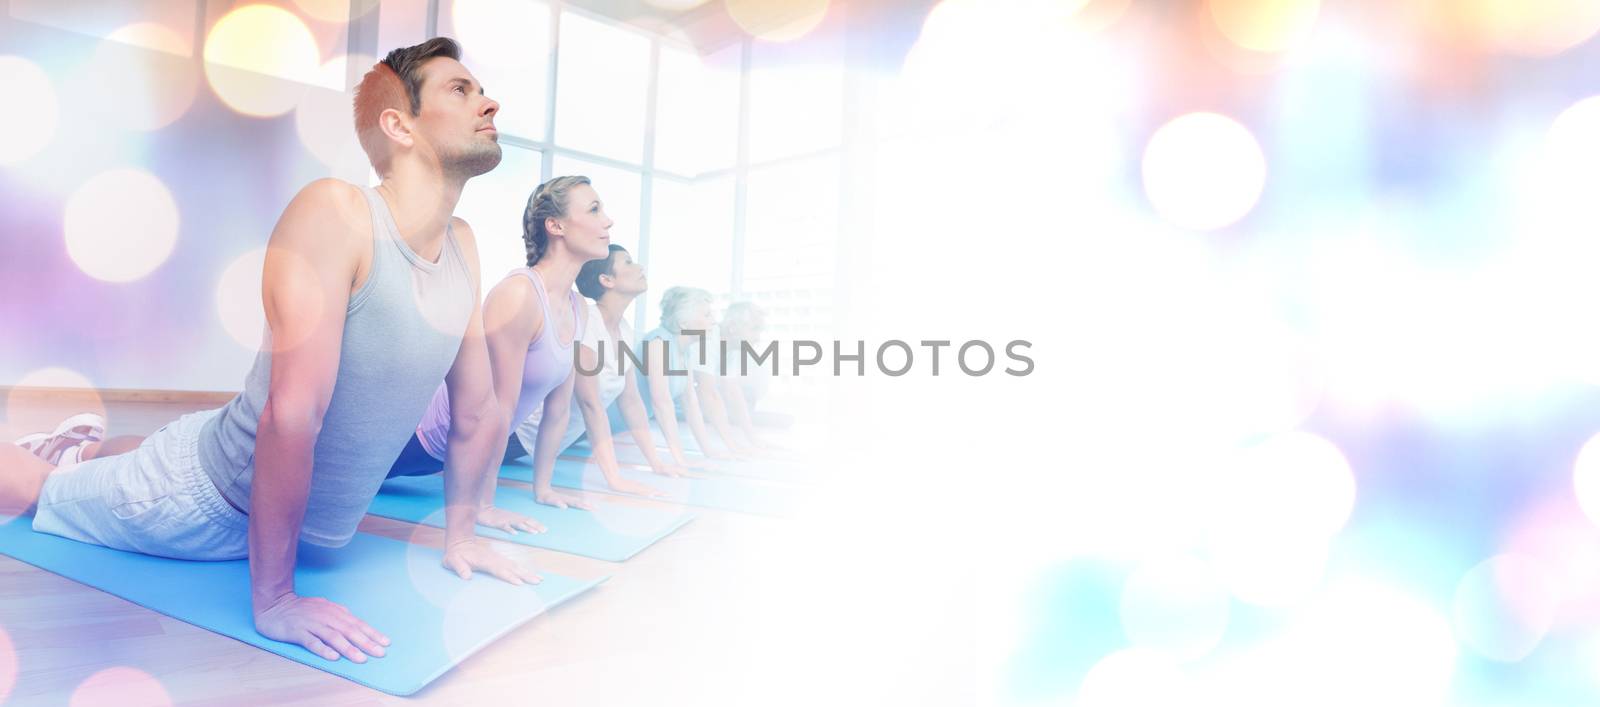 Glowing background against people exercising in row